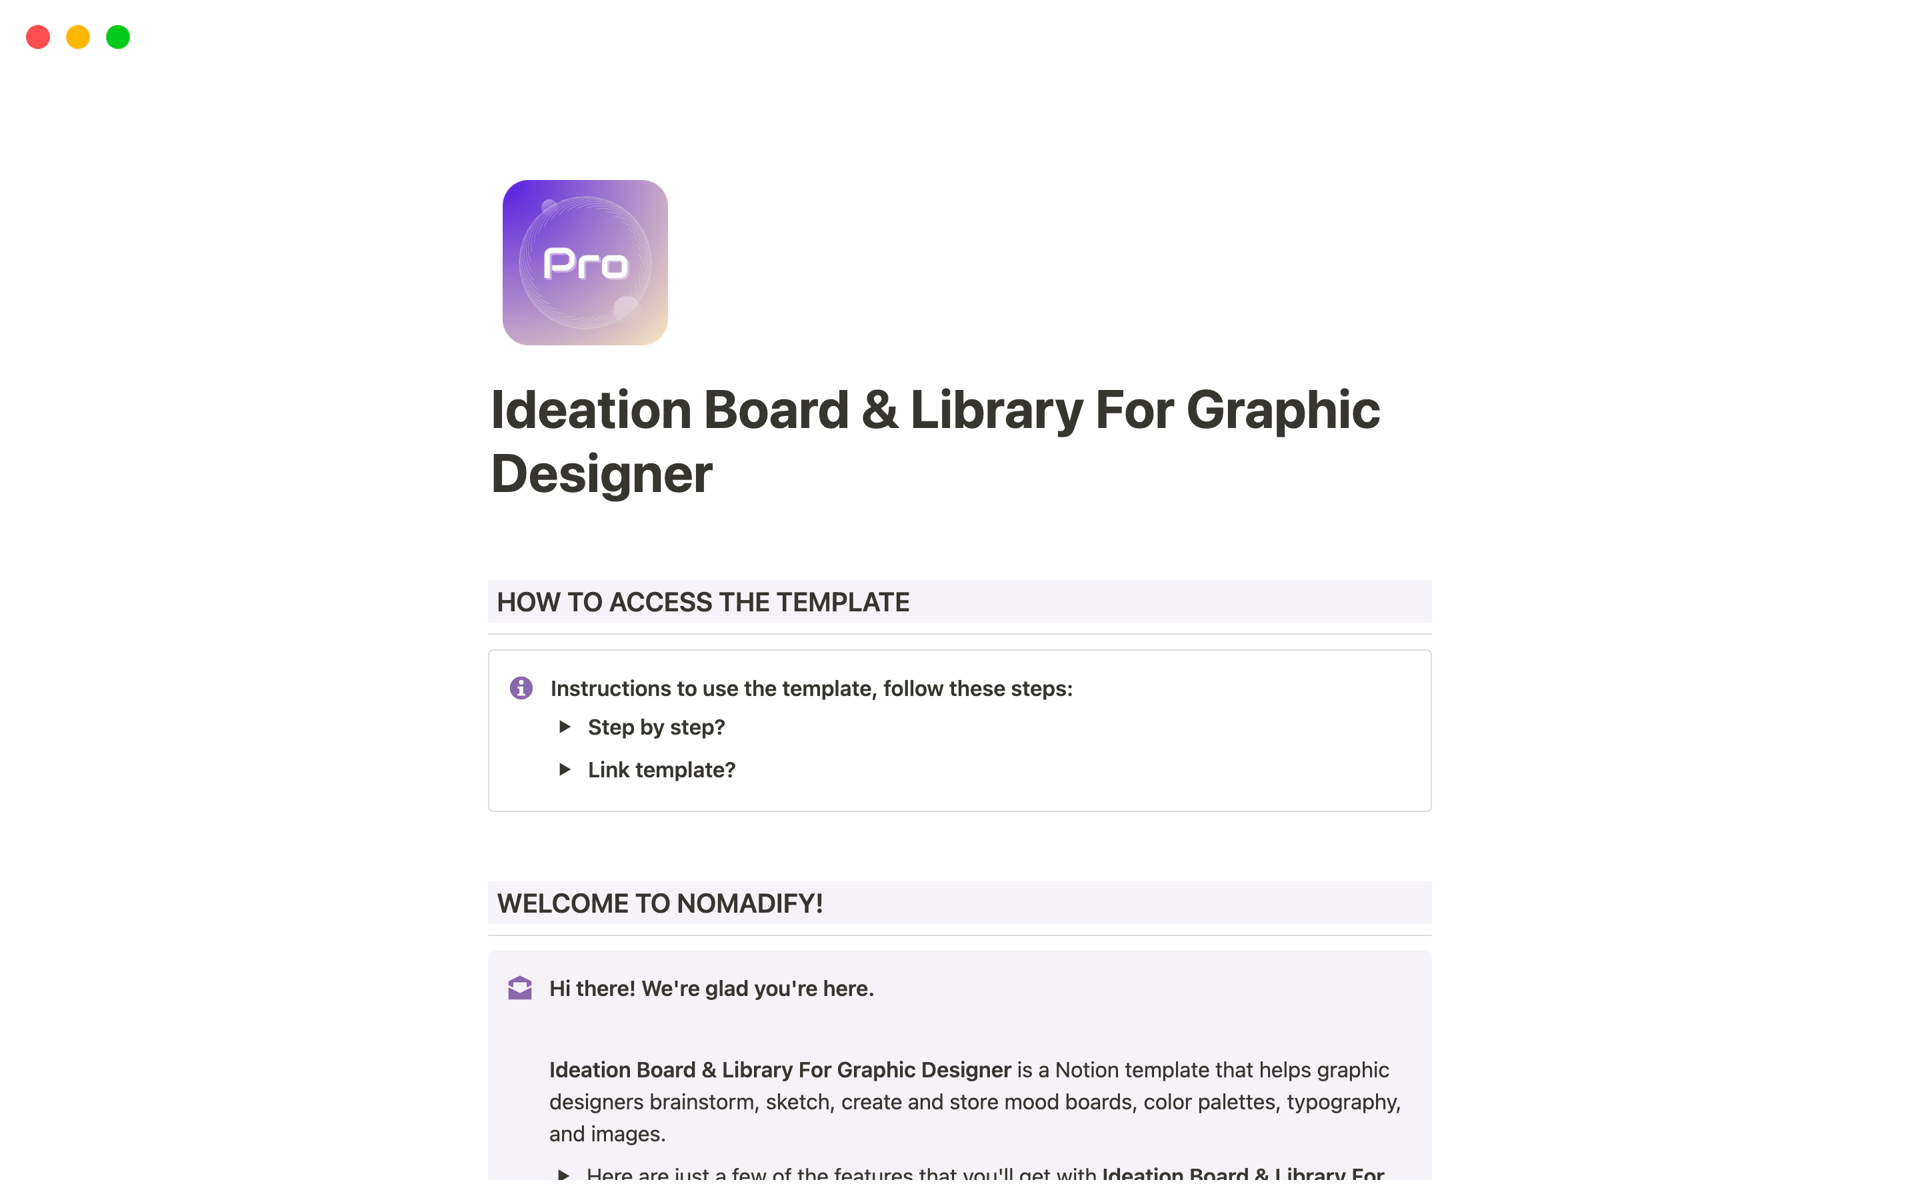 Ideation Board & Library For Graphic Designerのテンプレートのプレビュー